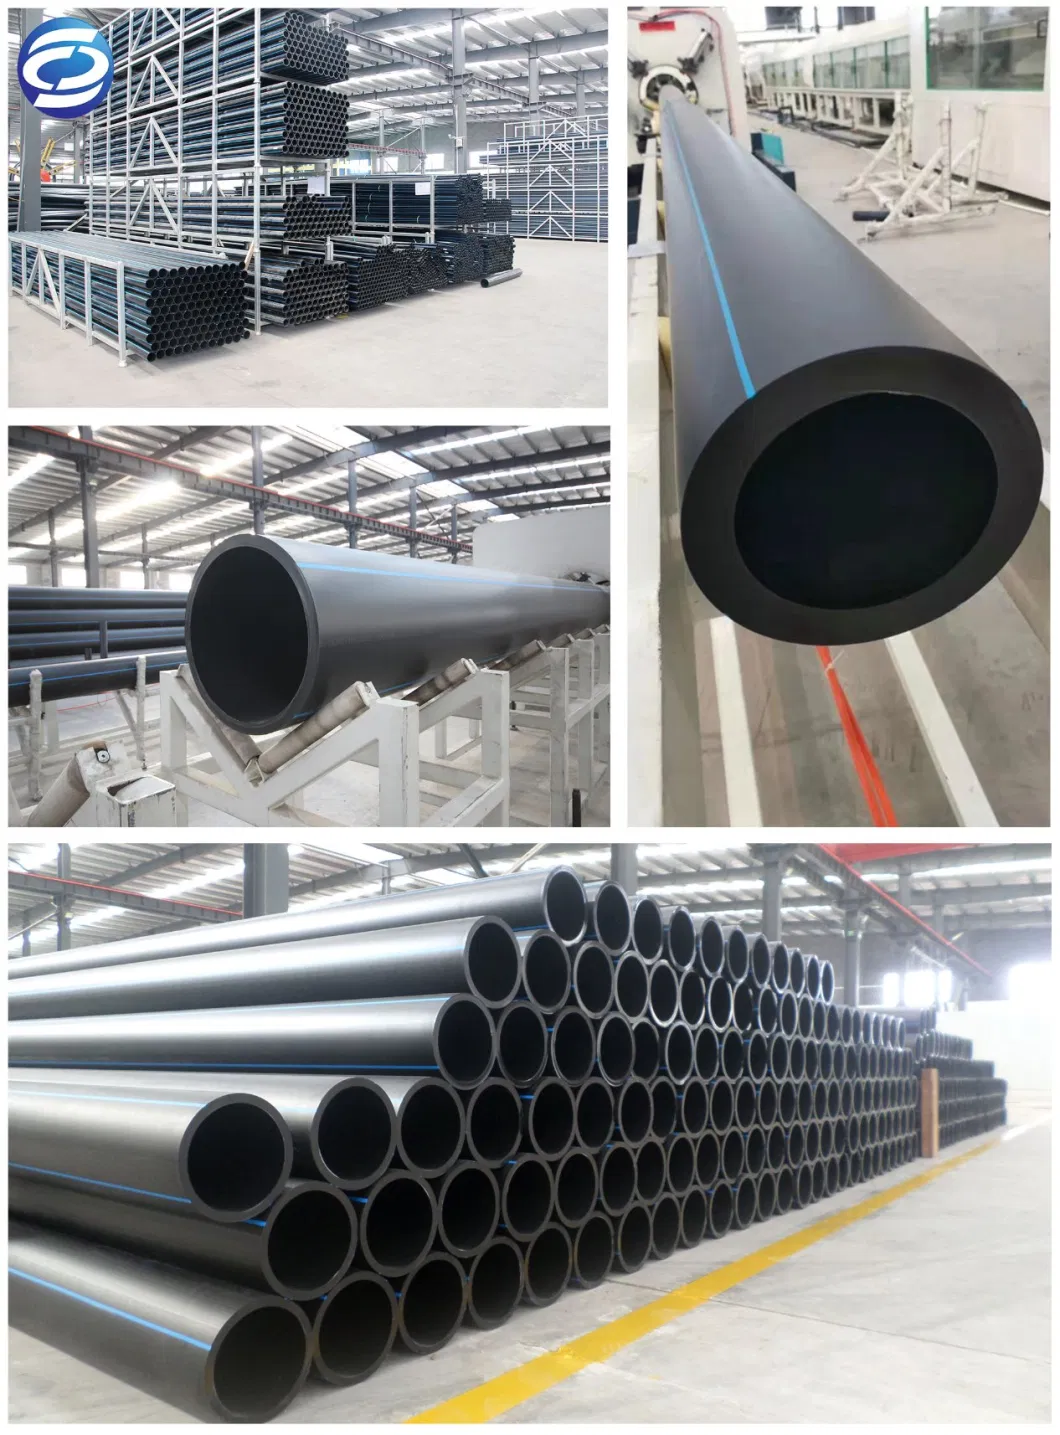 High Density Plastic Pipe Fitting and Pipe for MID-East Southeast Euro USA South Africa South America